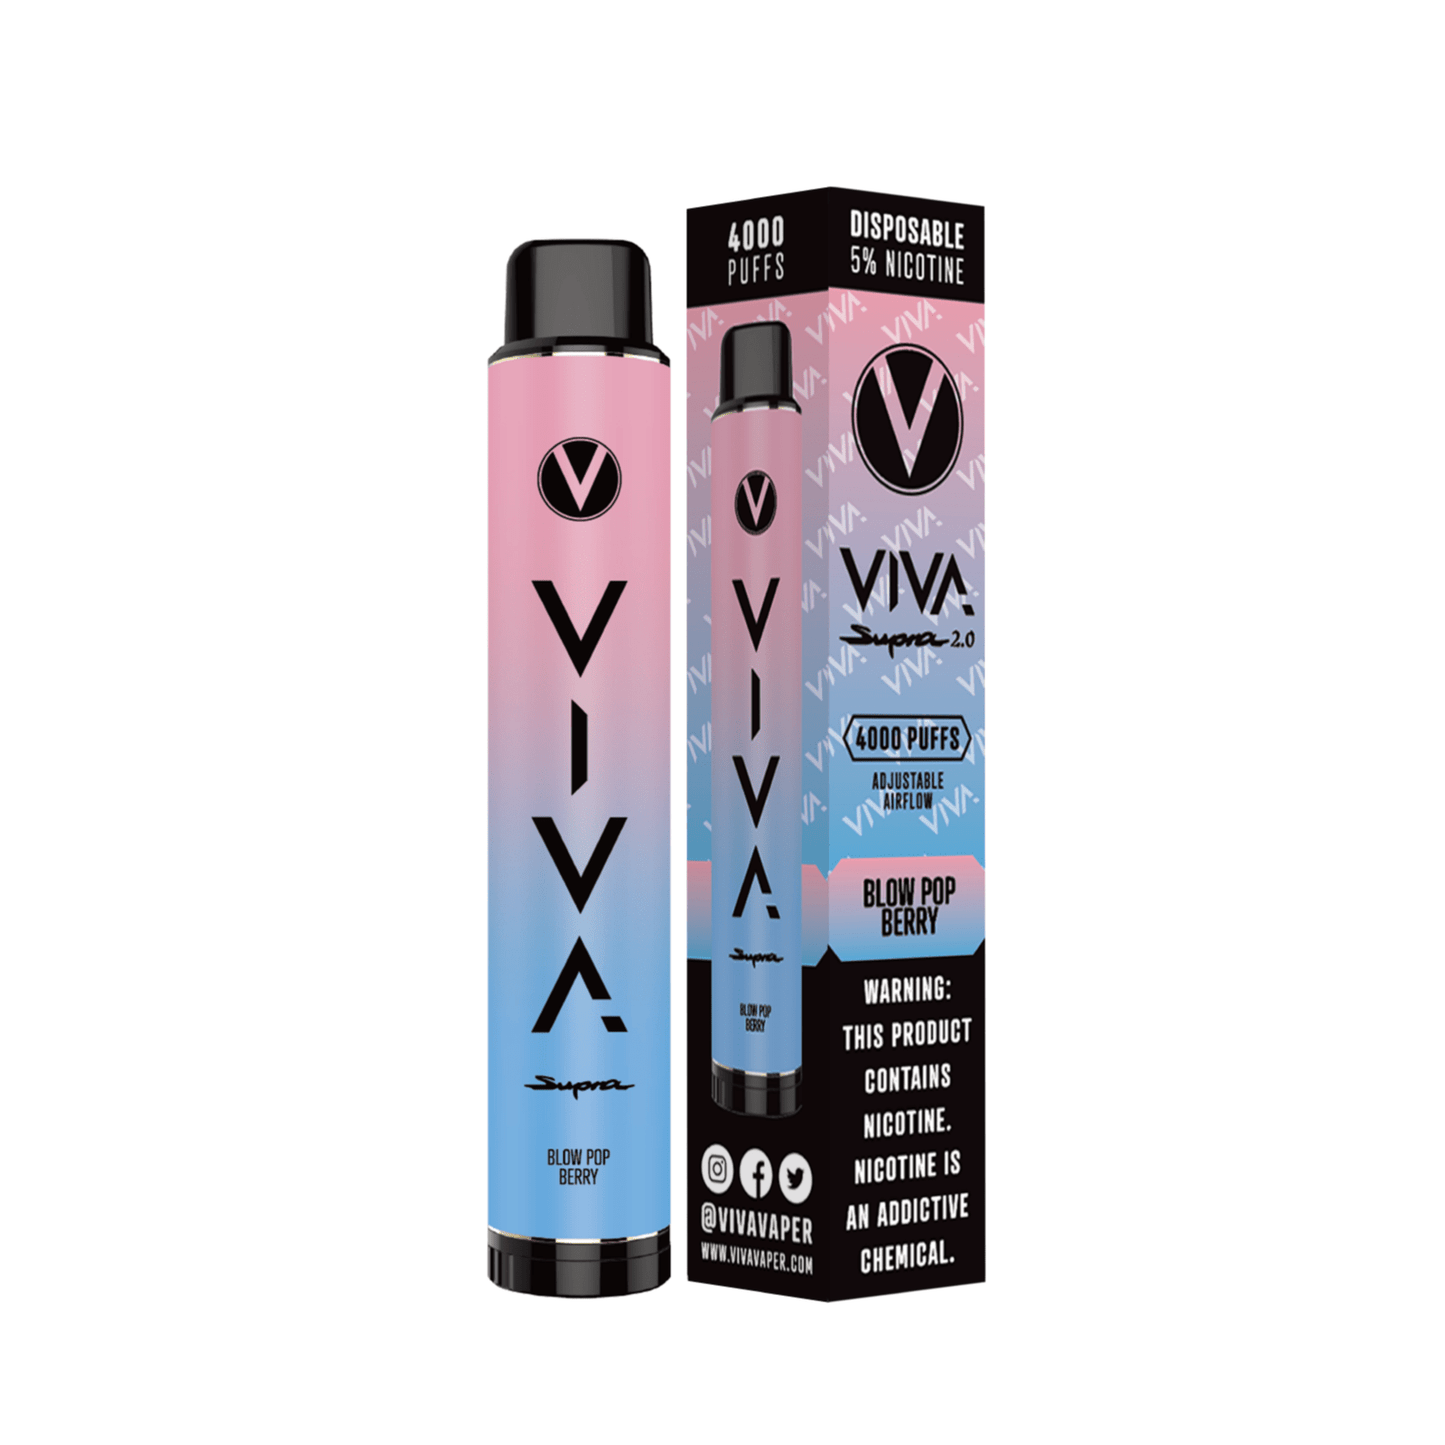 VIVA SUPRA BLOW POP BERRY 4000 PUFF DISPOSABLE - PRICE POINT NY